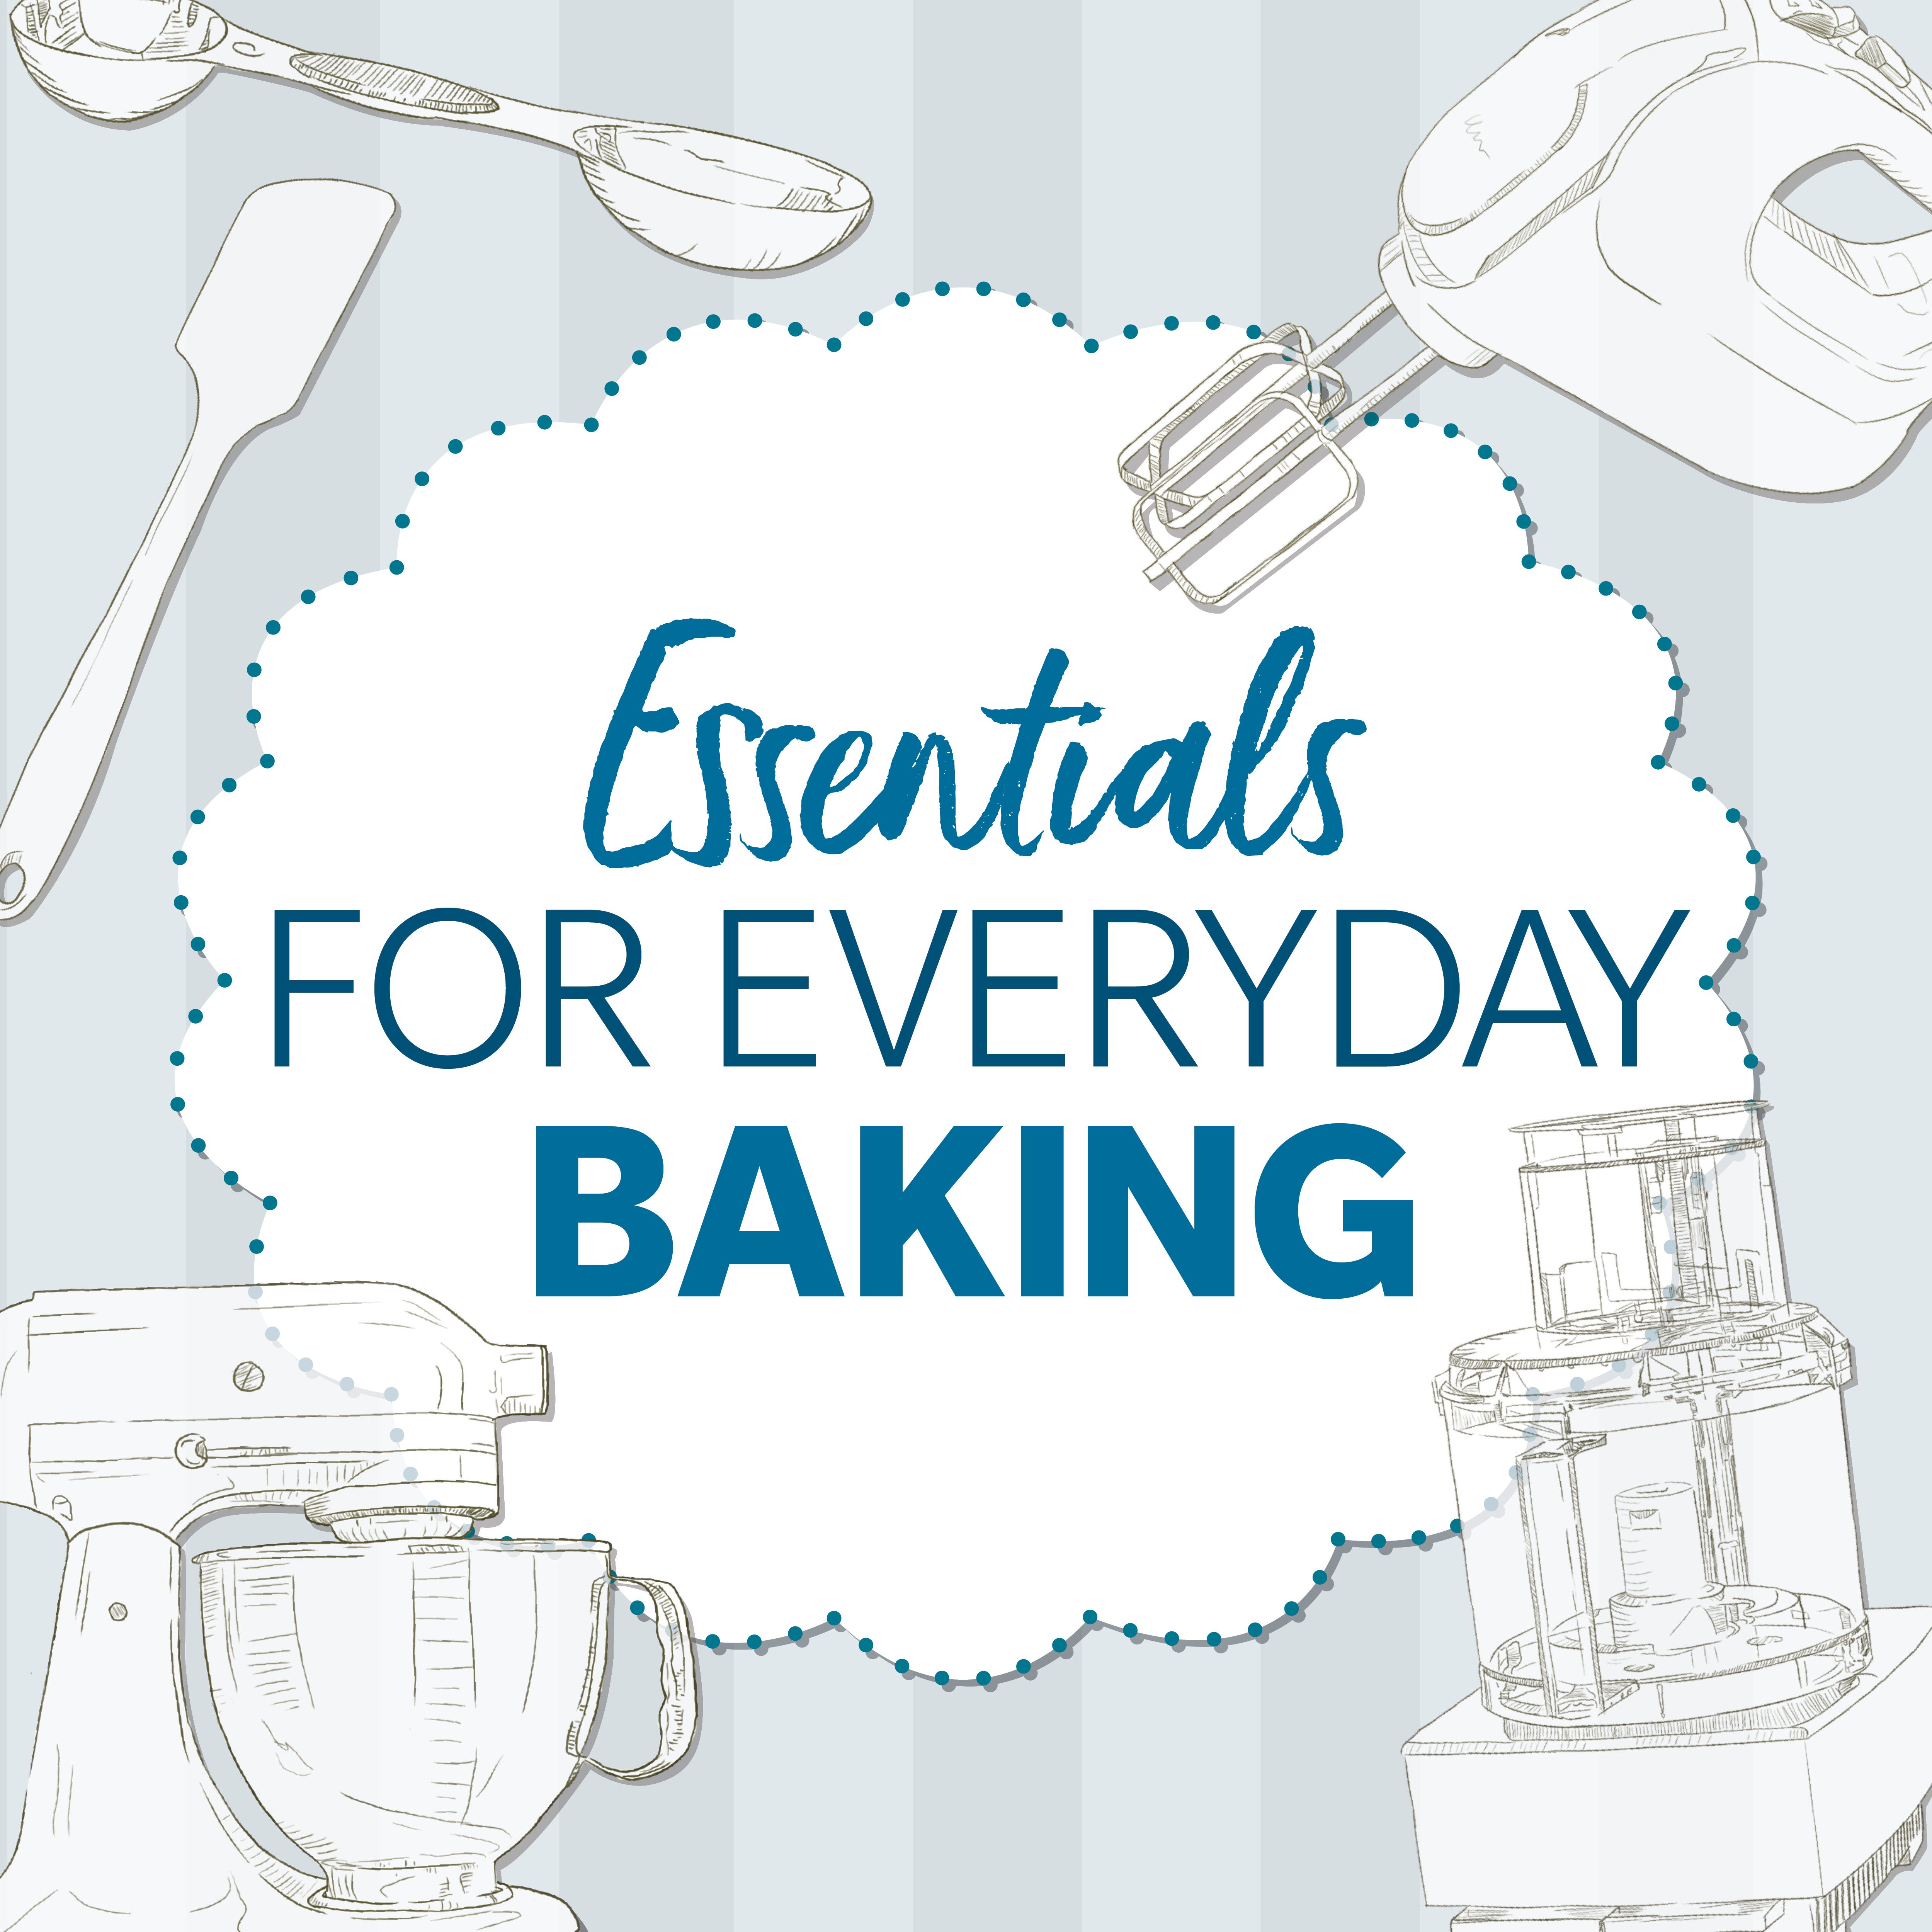 Home Baking Equipment: the BEST baking TOOLS 